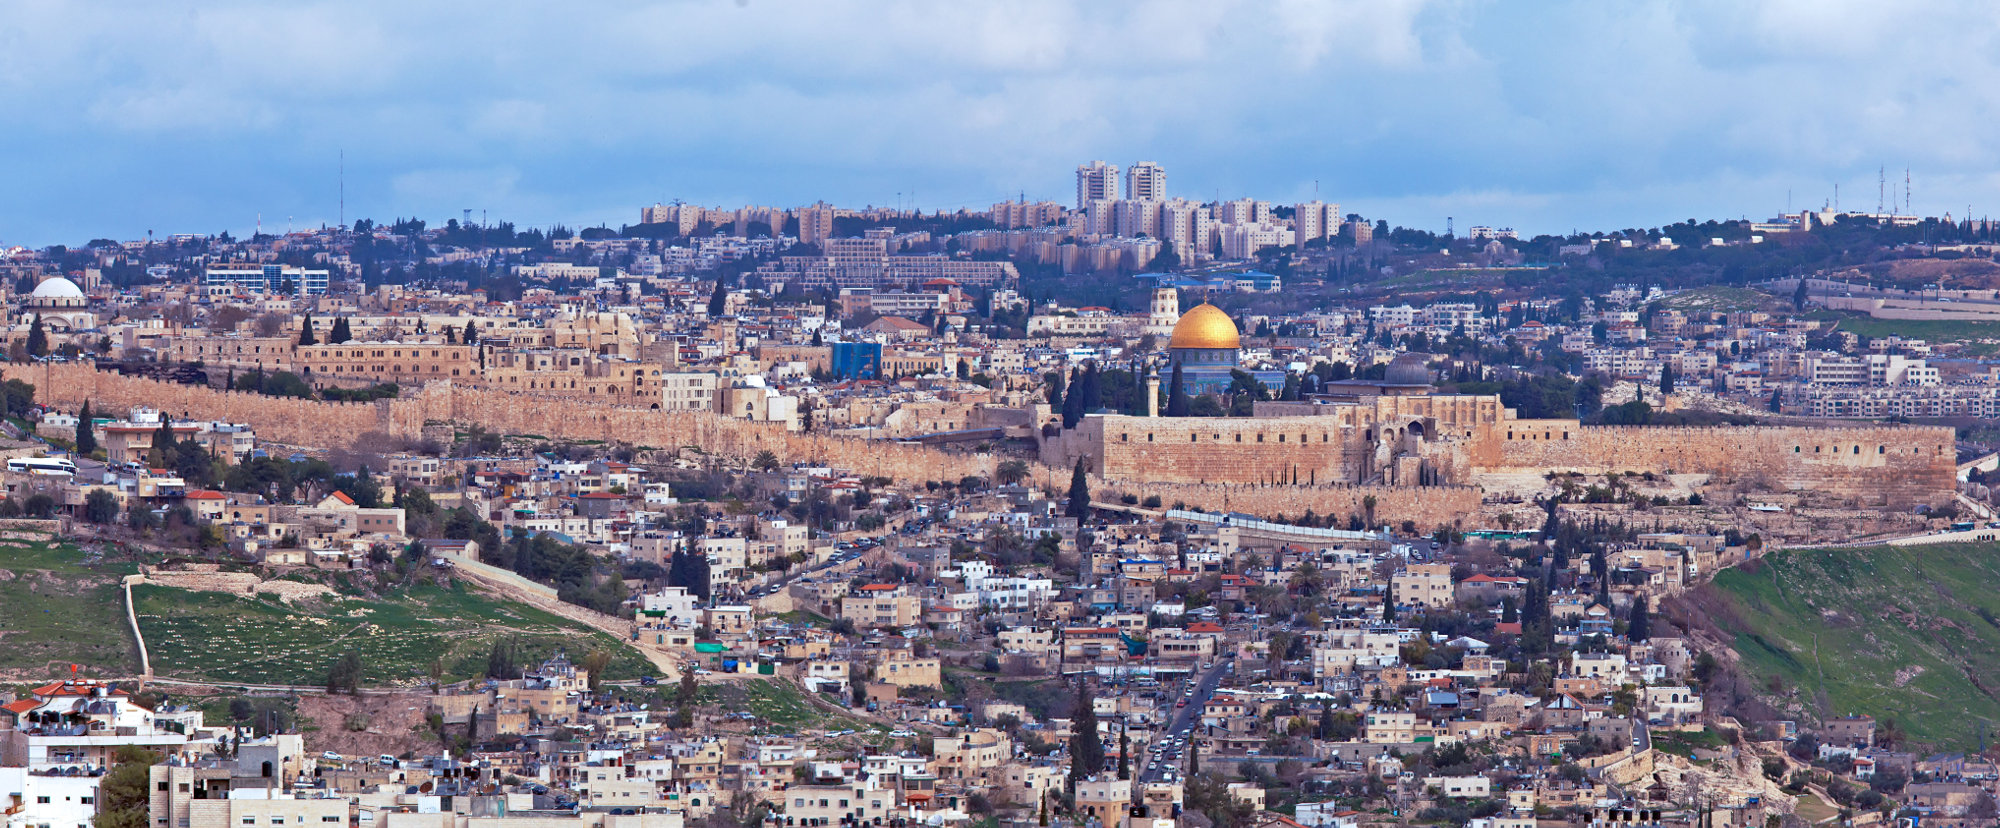 Tour Israel Jerusalem tours private first class tours